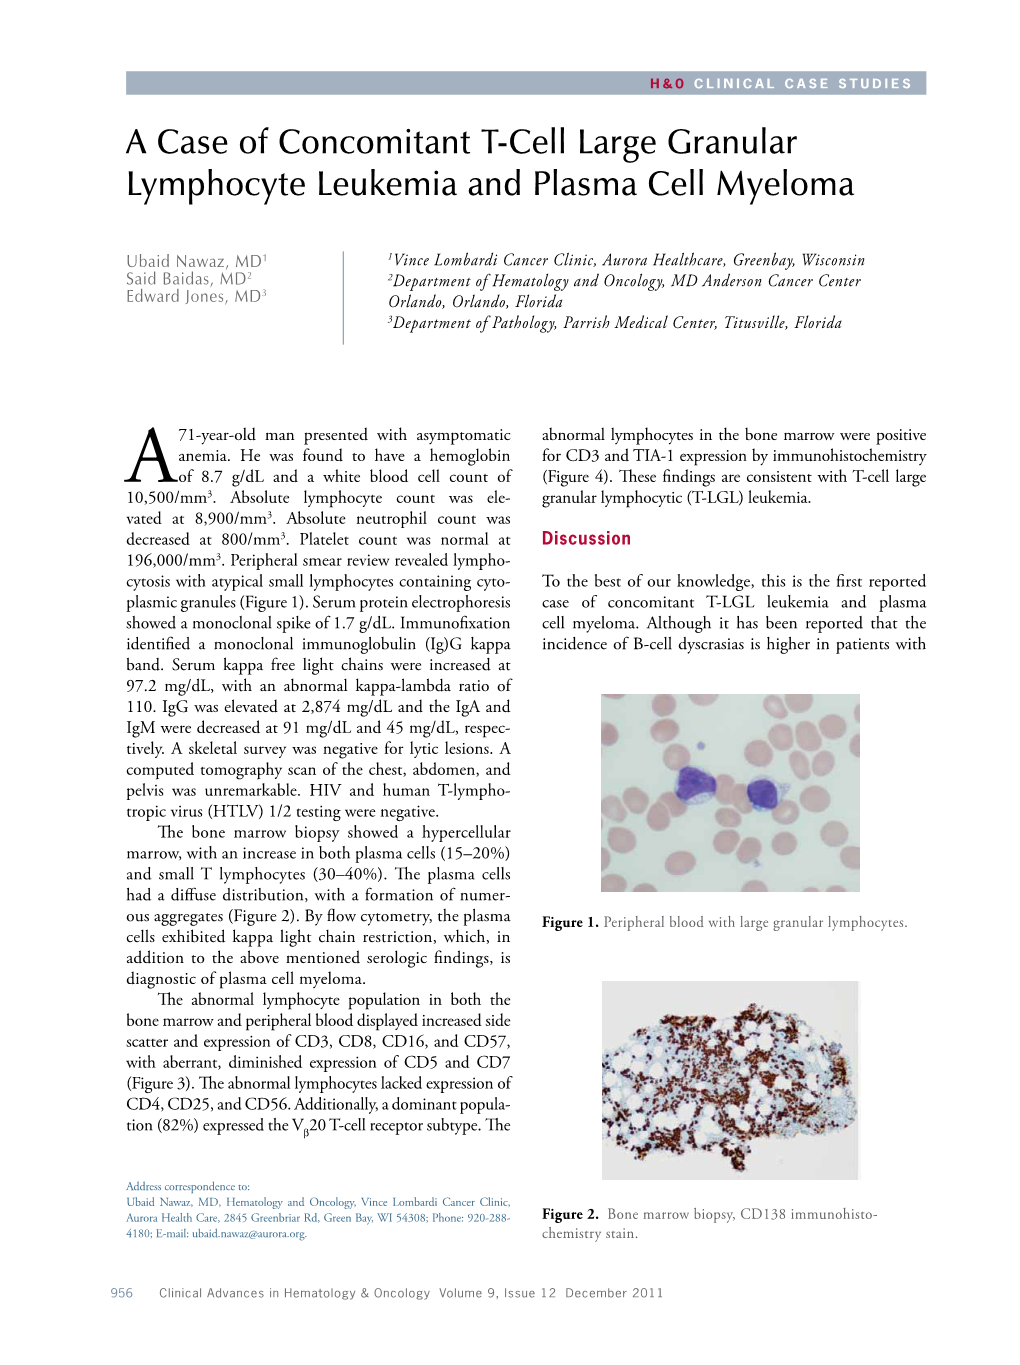 A Case of Concomitant T-Cell Large Granular Lymphocyte Leukemia and Plasma Cell Myeloma